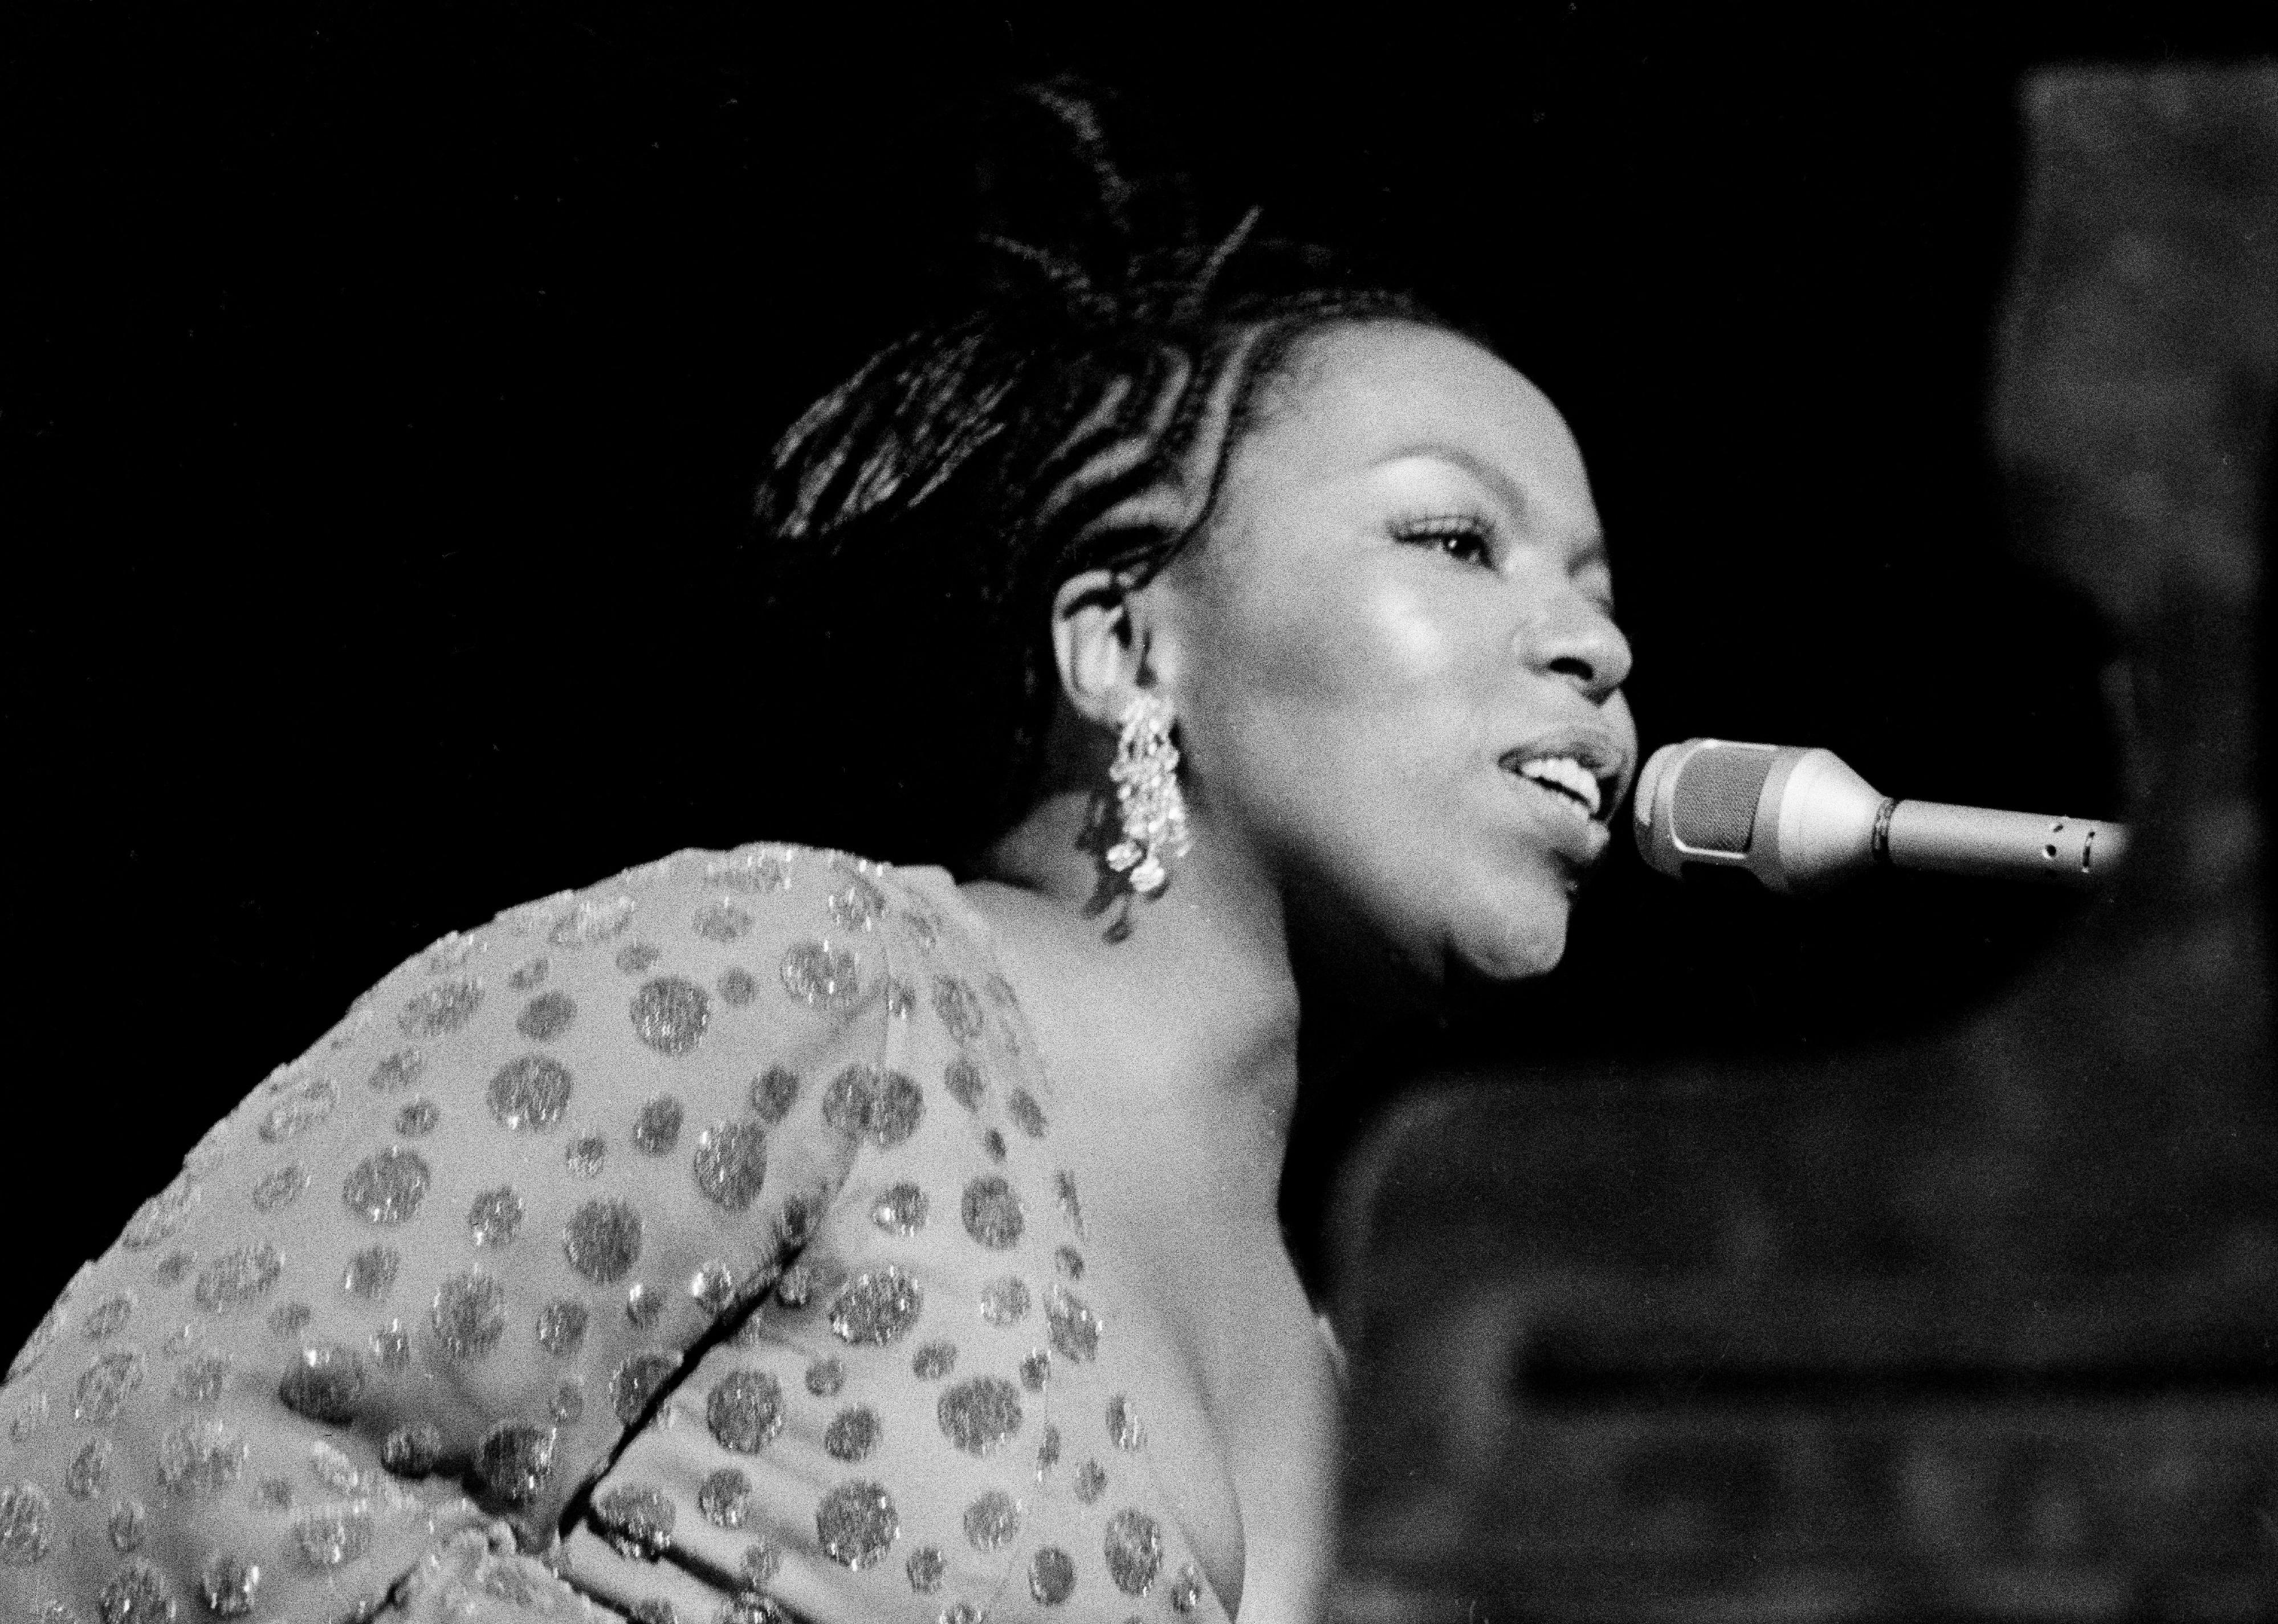 Roberta Flack performs on stage at Ronnie Scott's.